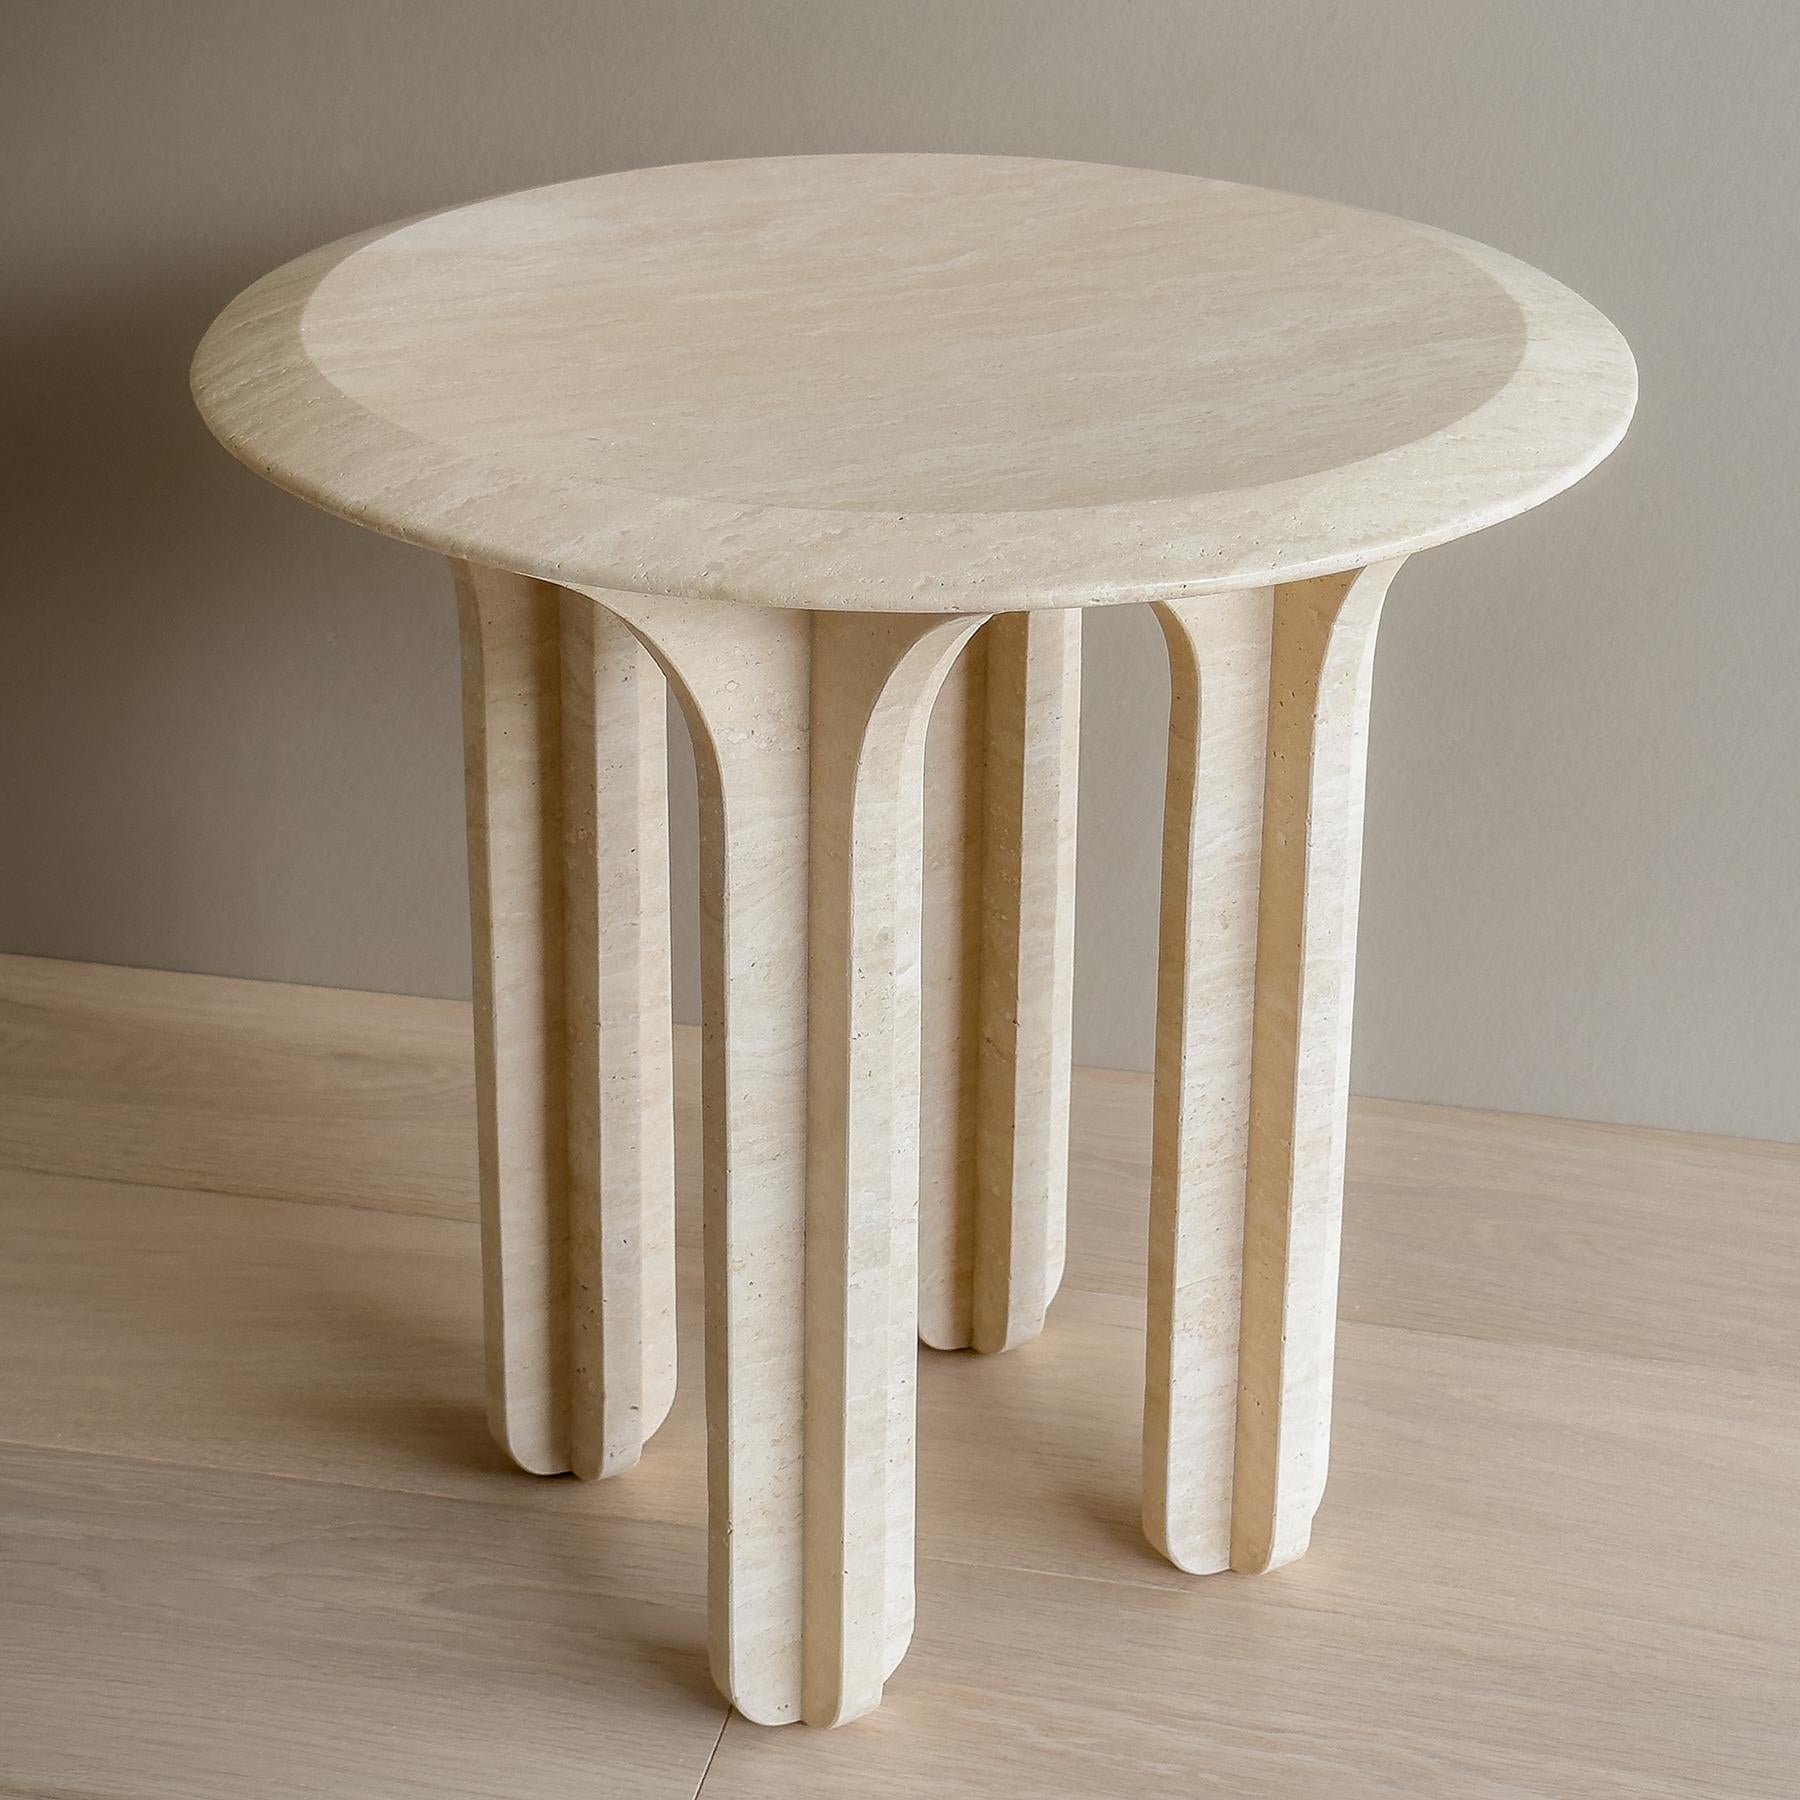 The CURVO Table is the perfect centerpiece to any contemporary home. Crafted from Italian Travertine, it has a sculptural quality that is sure to make a statement. Its carved legs were inspired by arches, giving it an elegant and timeless look. The